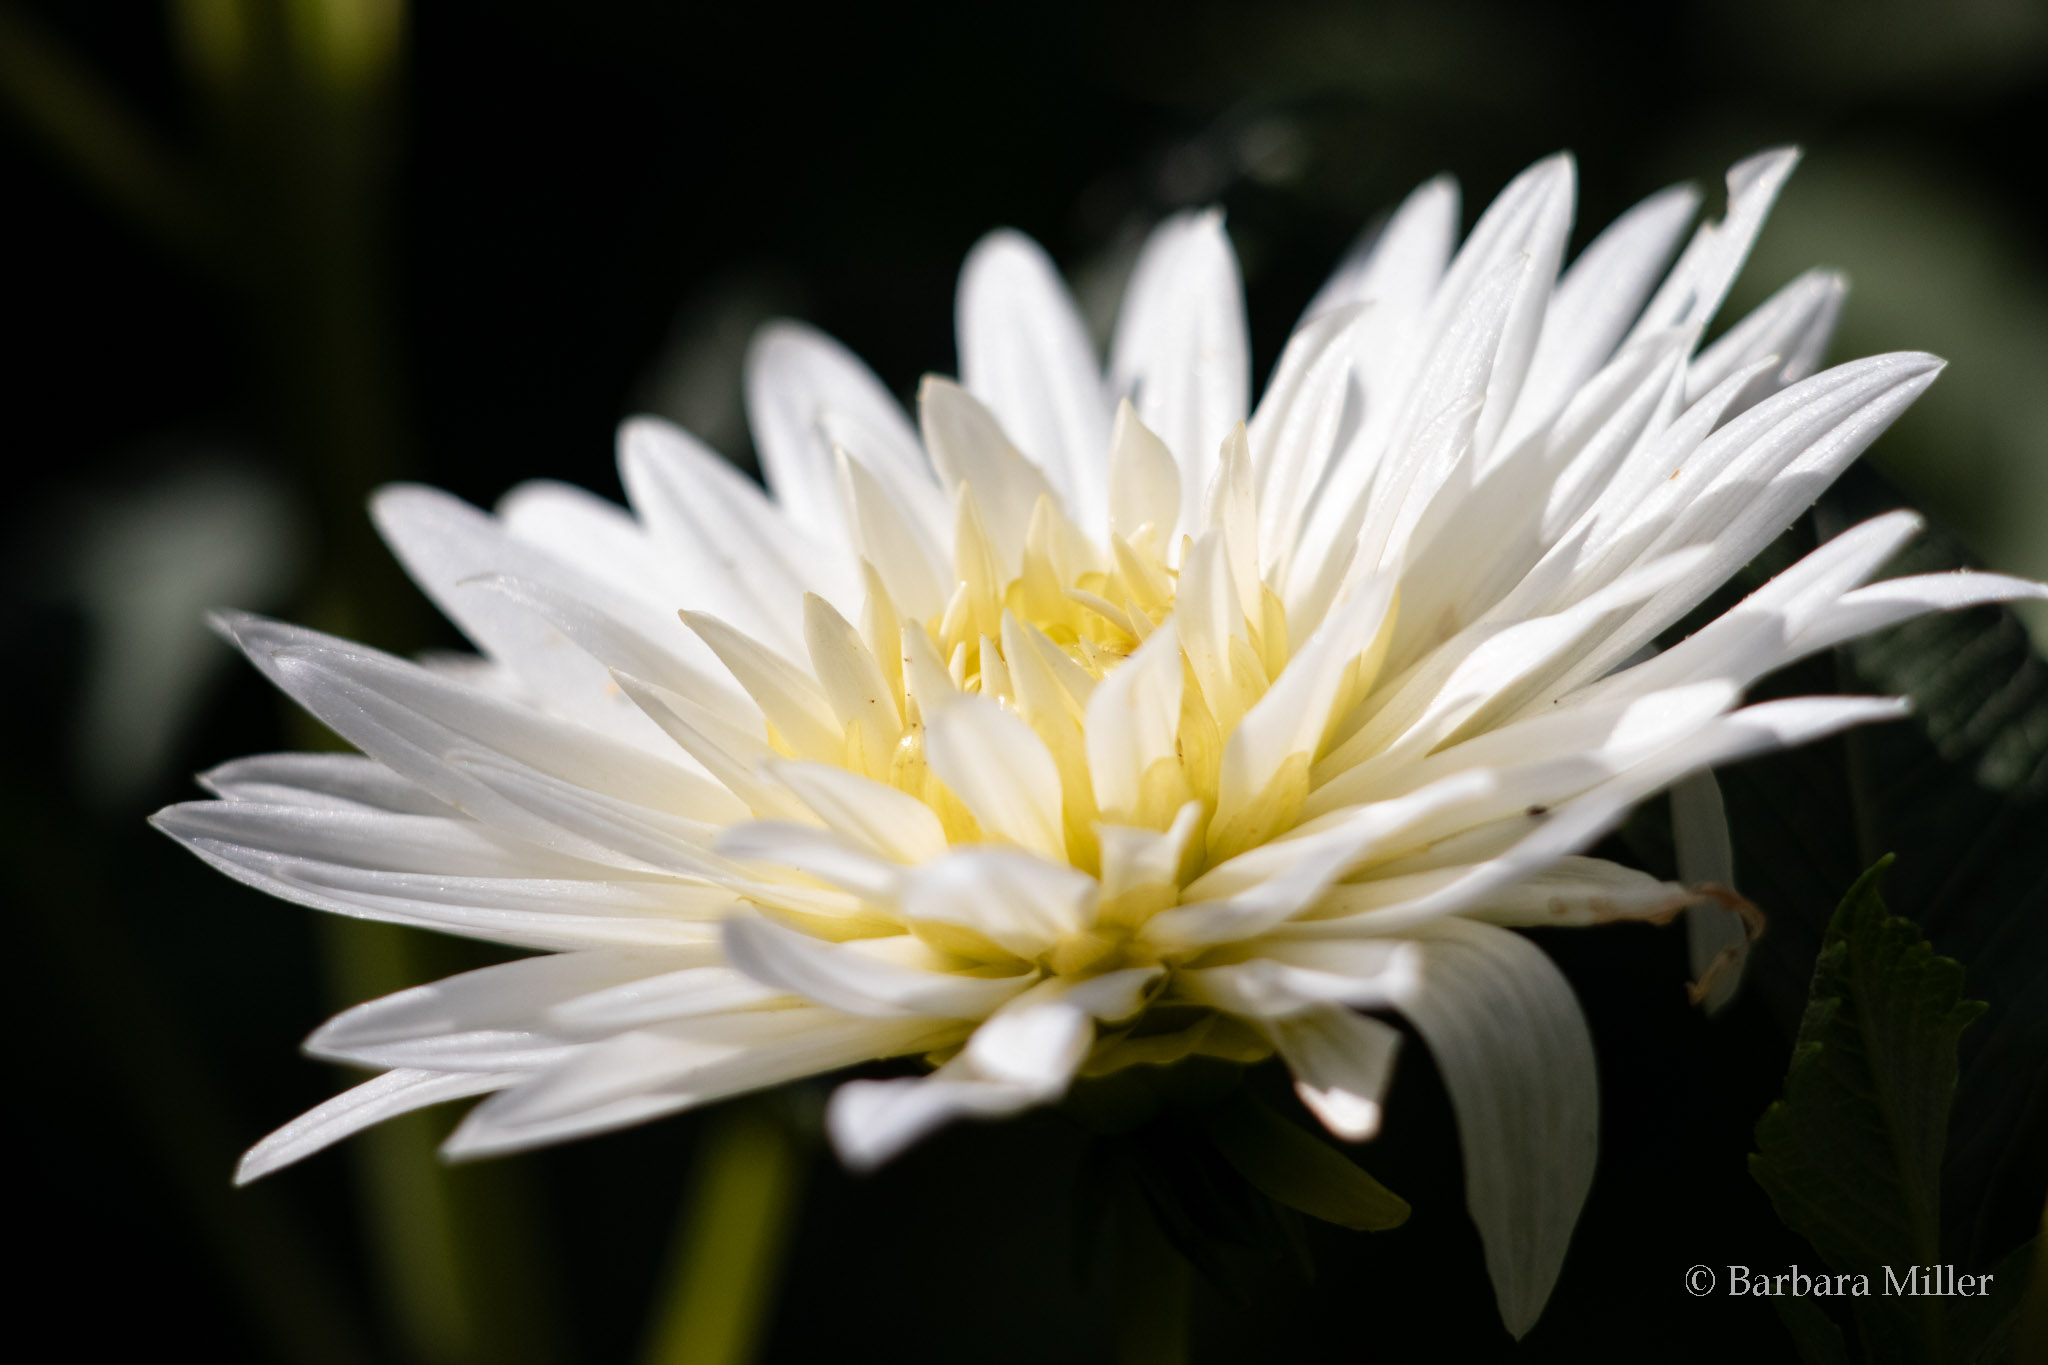 My Love dahlia, a white flower with yellow tones near the center, against a dark background.